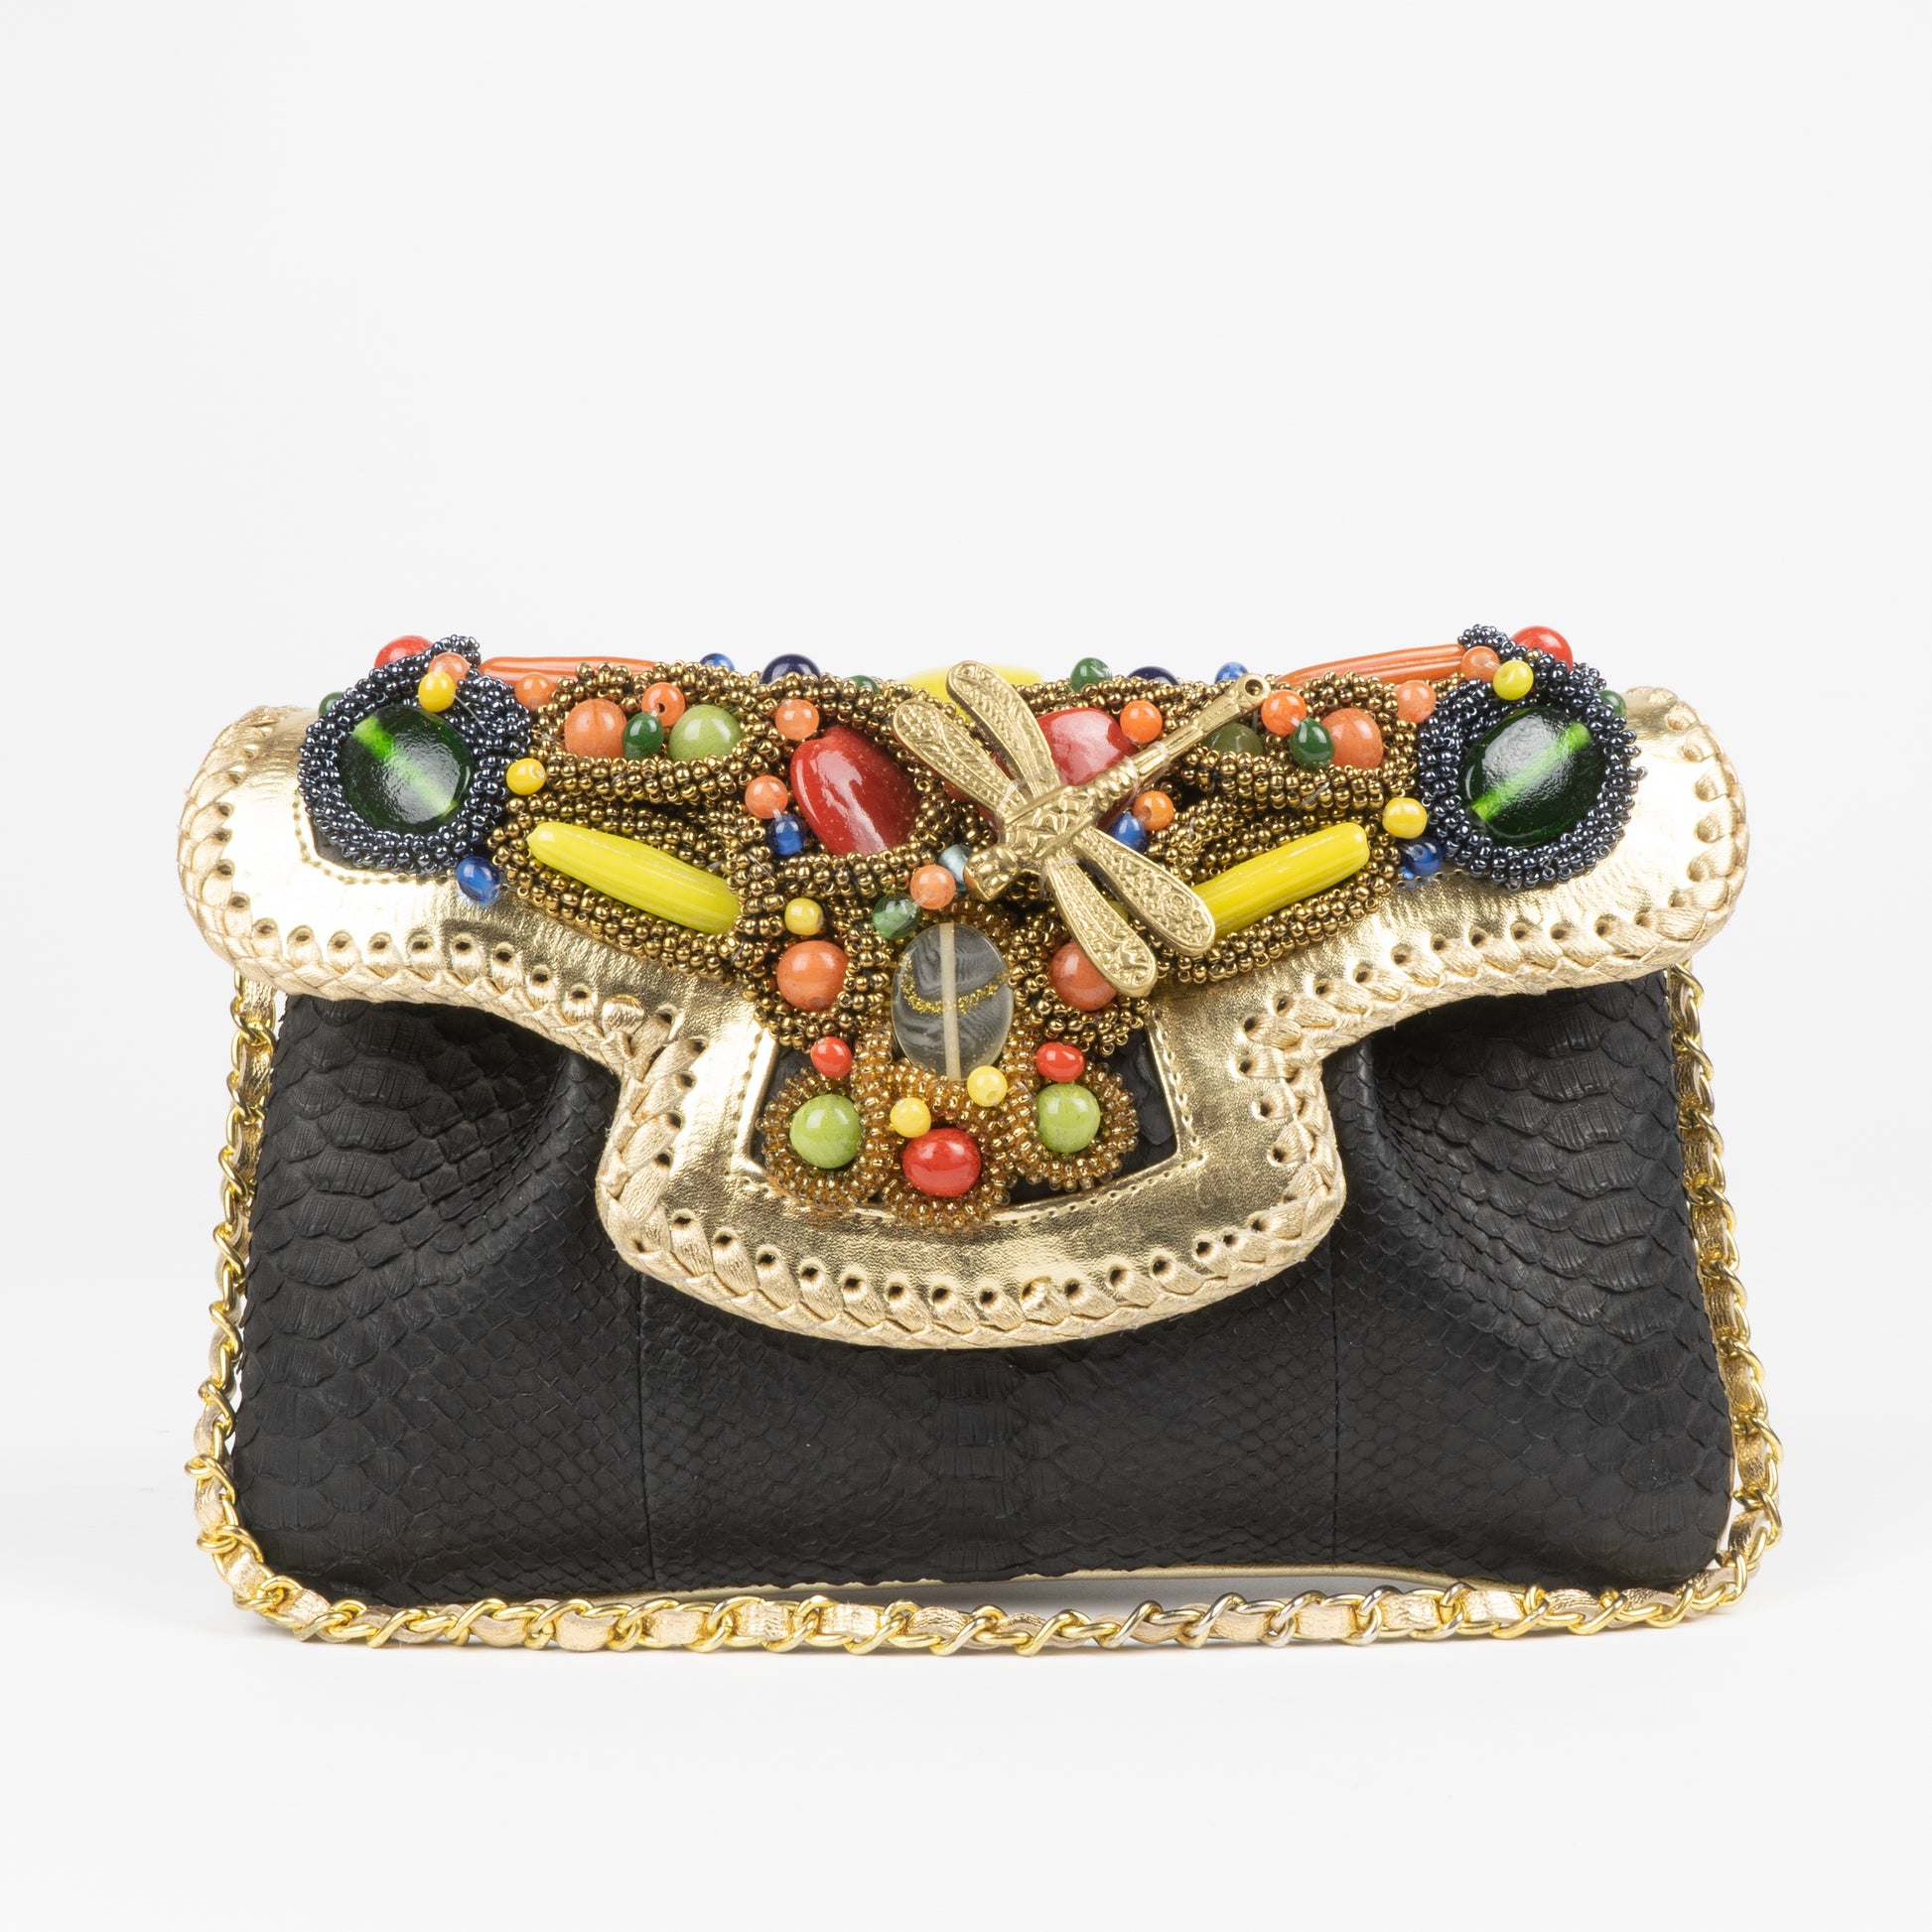 Black python handbag with beads from Sherrill Brothers